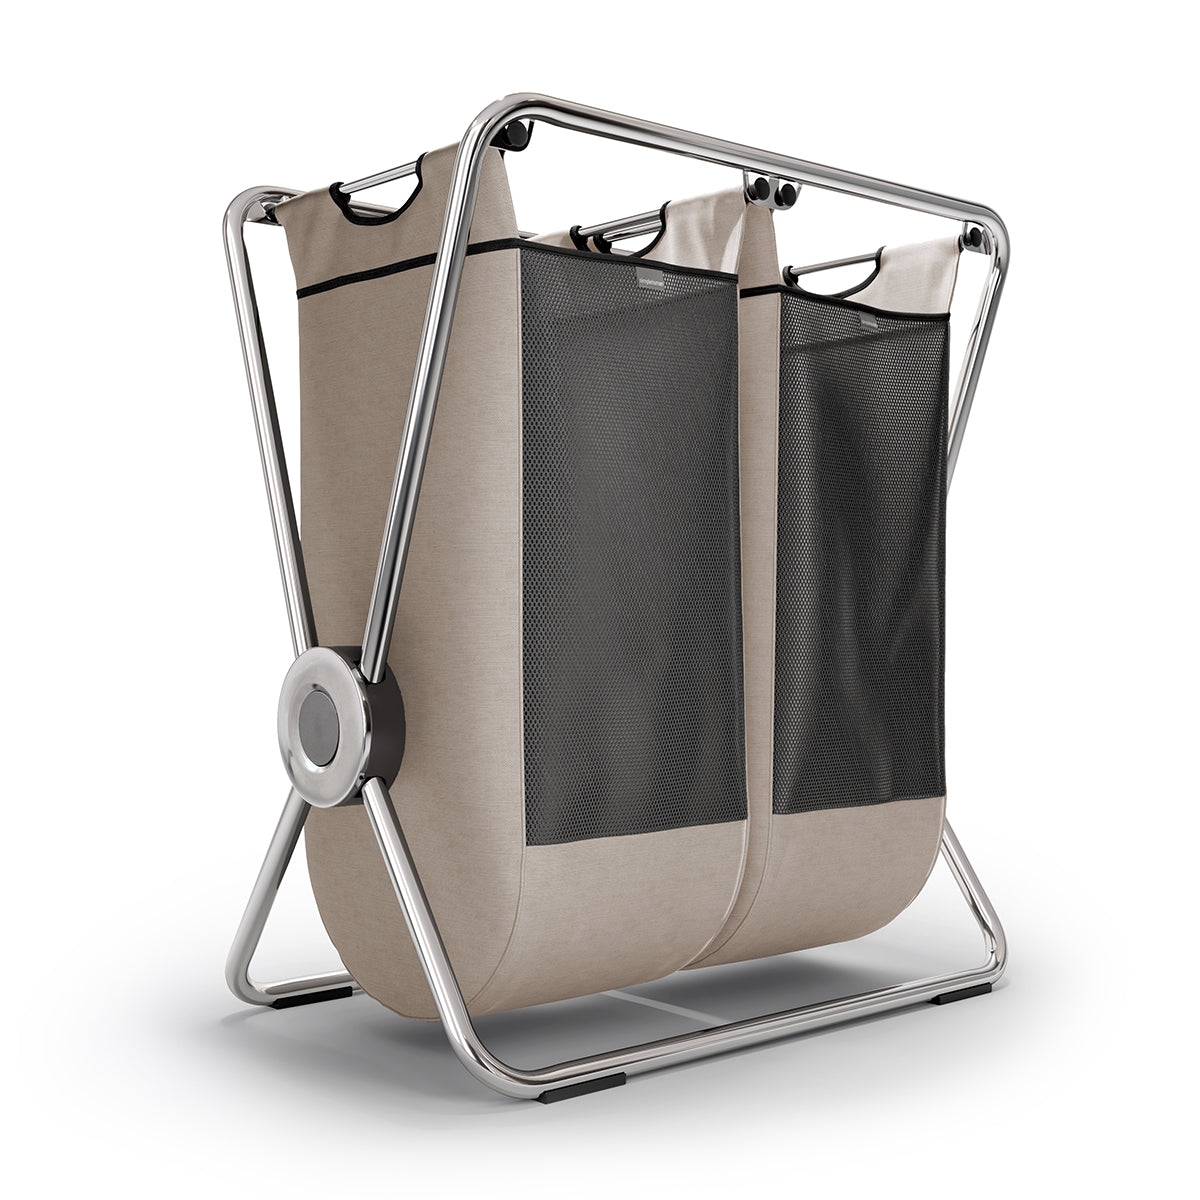 double x-frame hamper product support (current model)